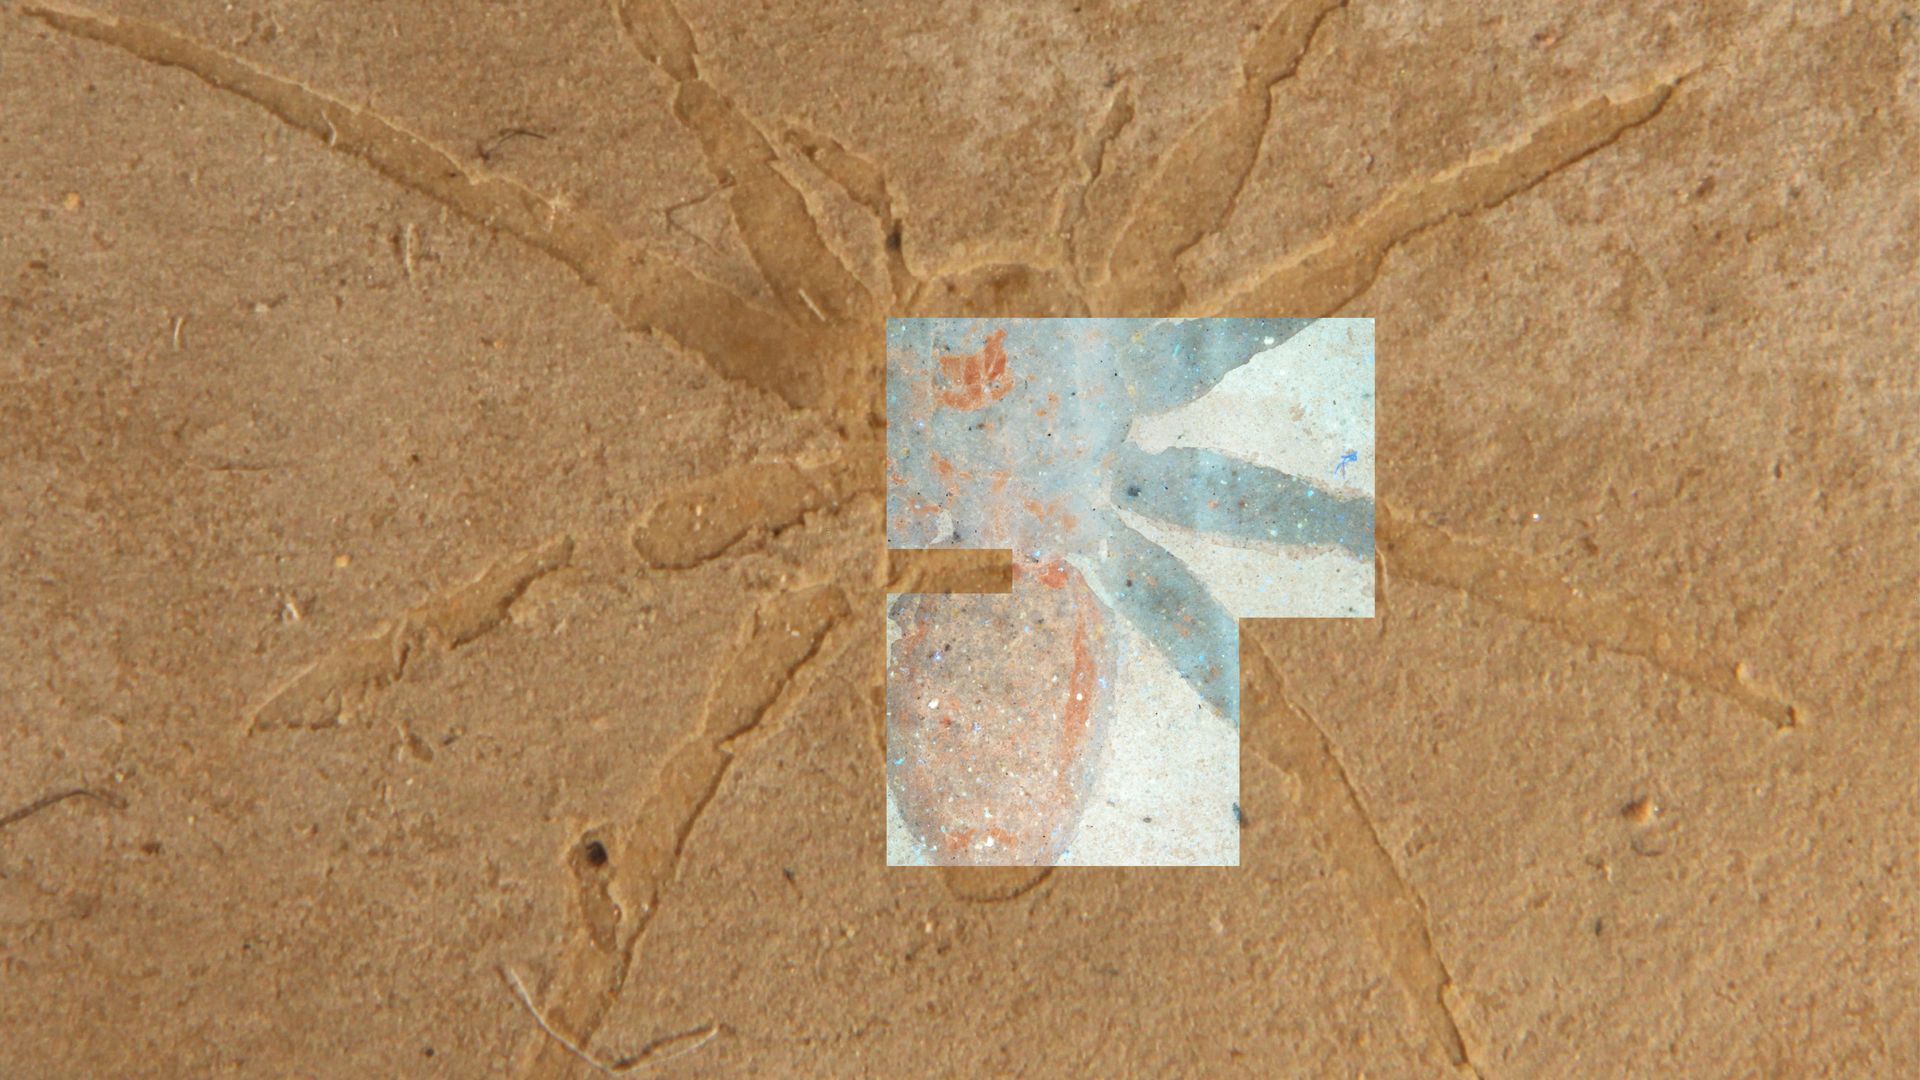 Fossilized spider from the Aix-en-Provence Formation in France seen in hand sample overlain with fluorescent microscopy image of the same fossil. 